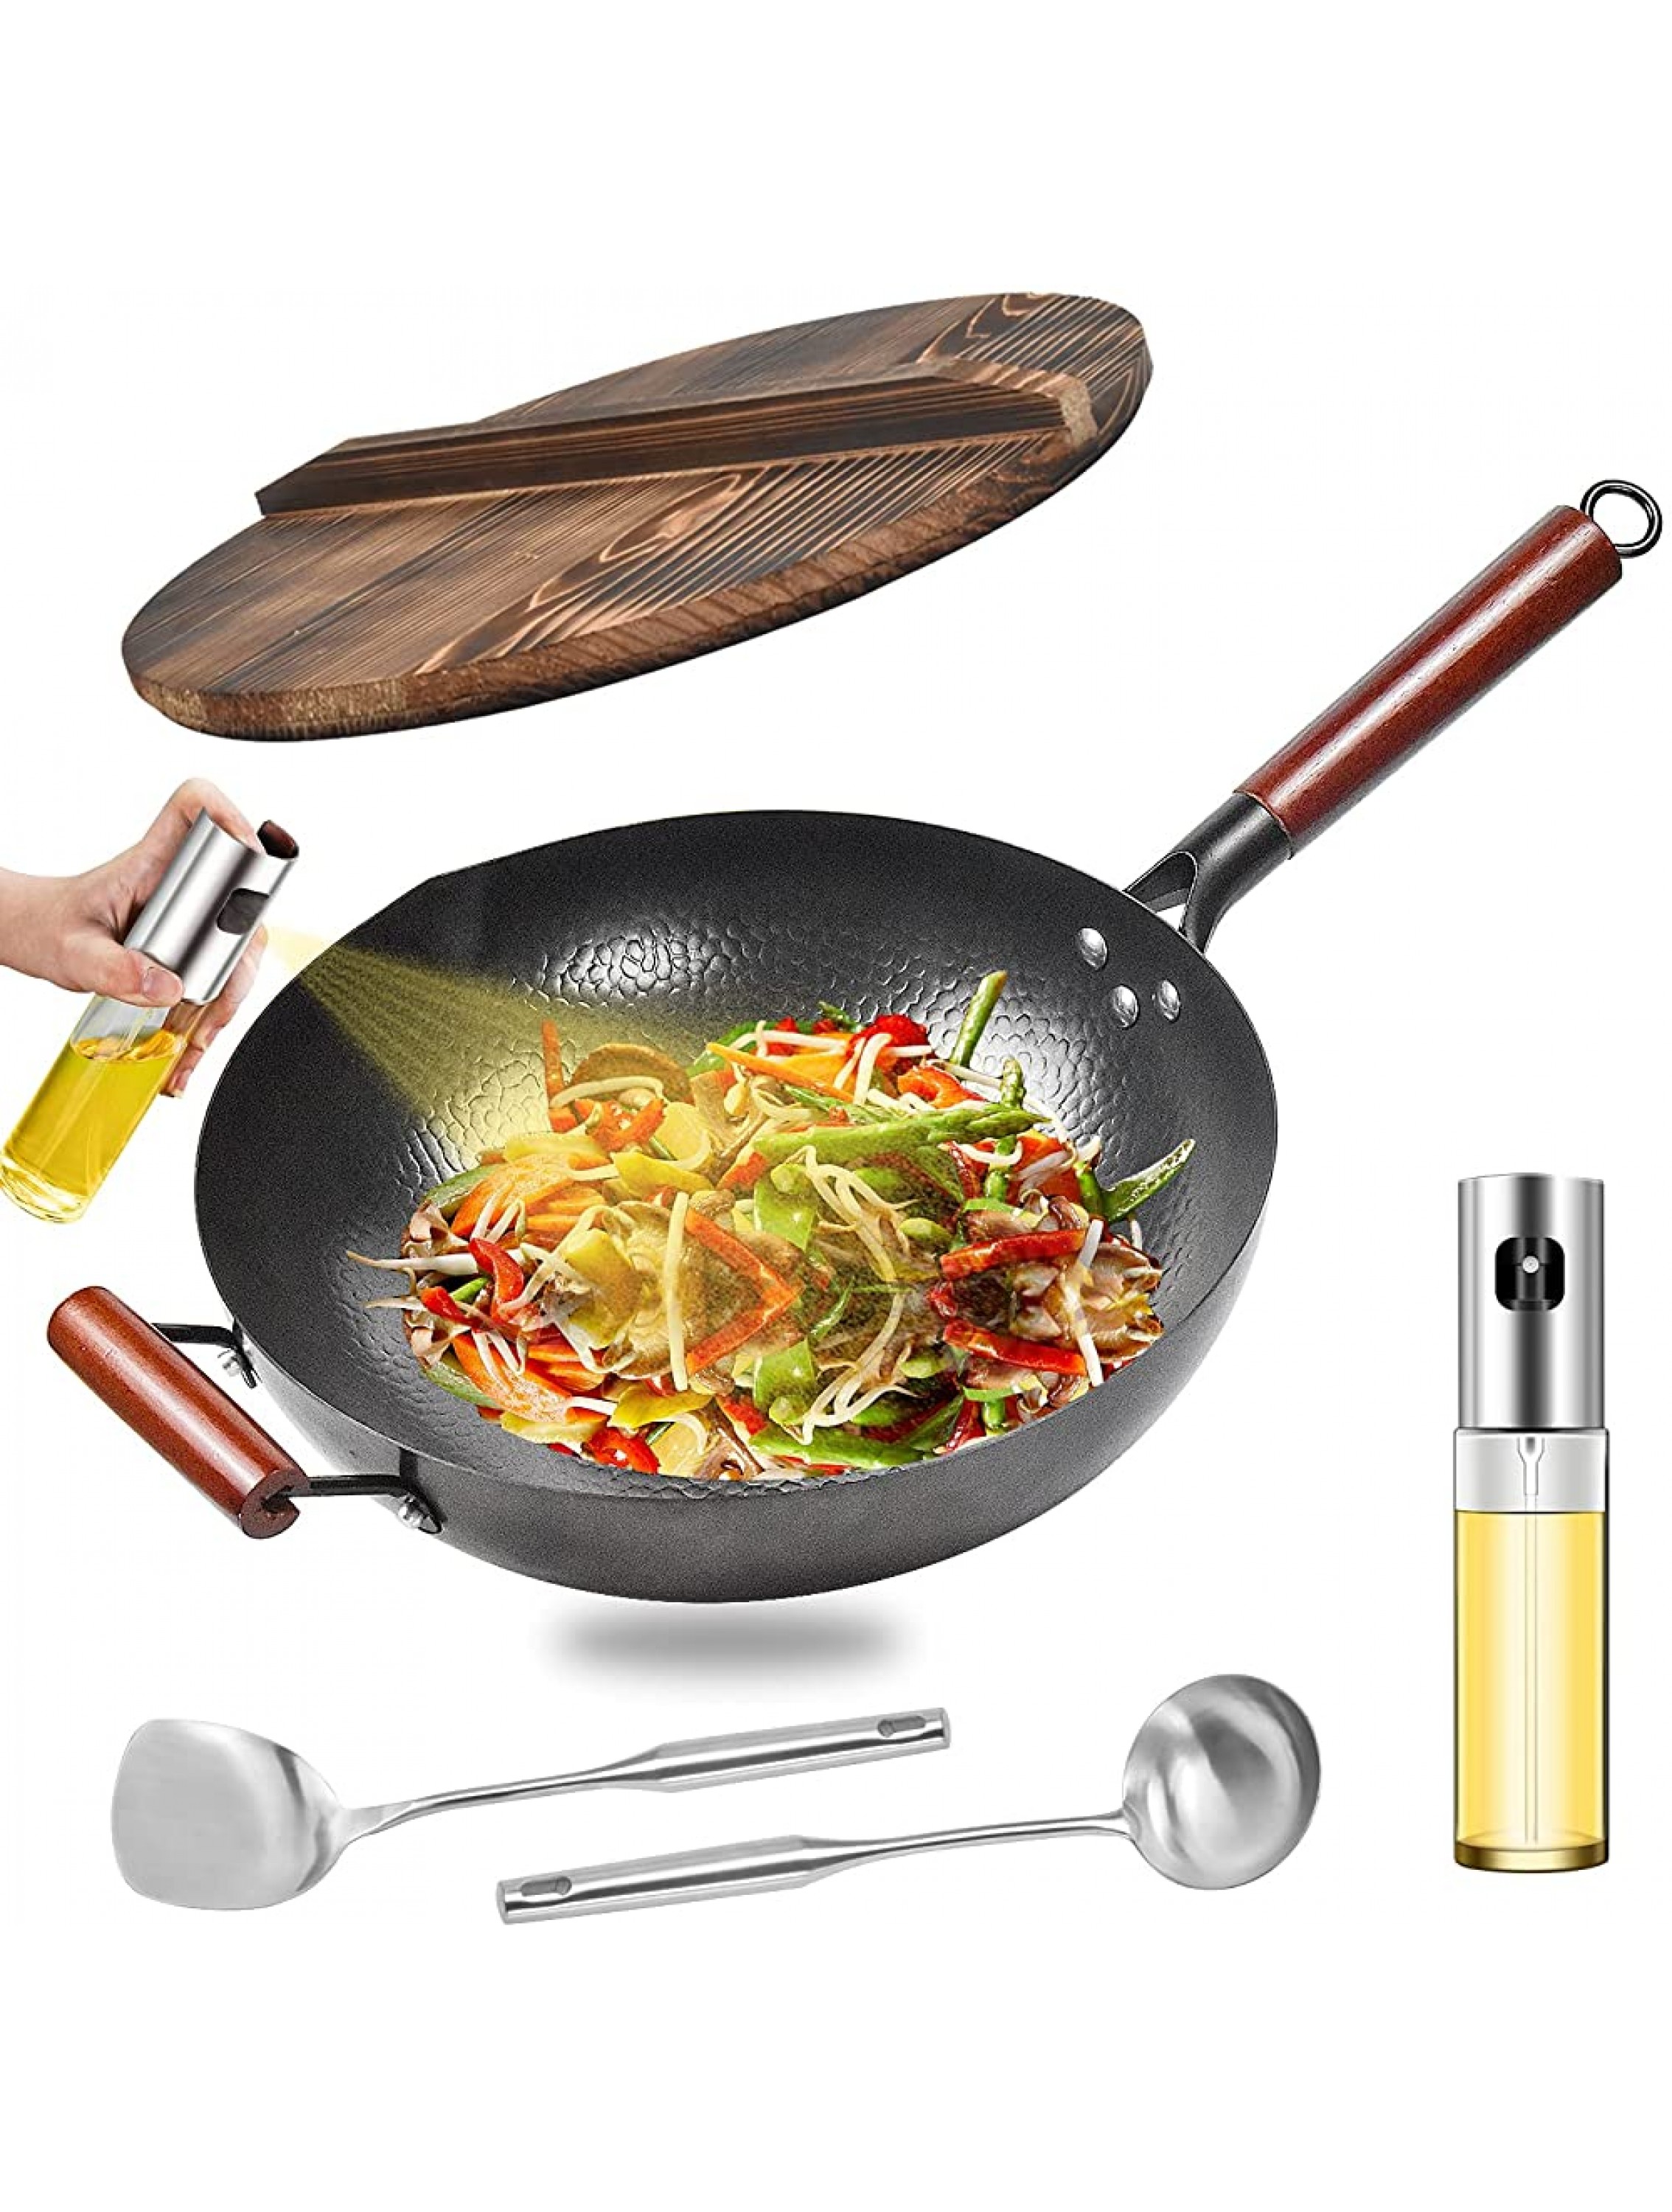 Carbon Steel Wok Pan Chemical-free Woks and Stir Fry Pans with Lid & Oil Sprayer Chinese Iron Pot with Wooden Handle 12.6 Cooking Pans for Electric Induction Gas Stoves Flat Bottom Even Heating - BLP2L9EIF